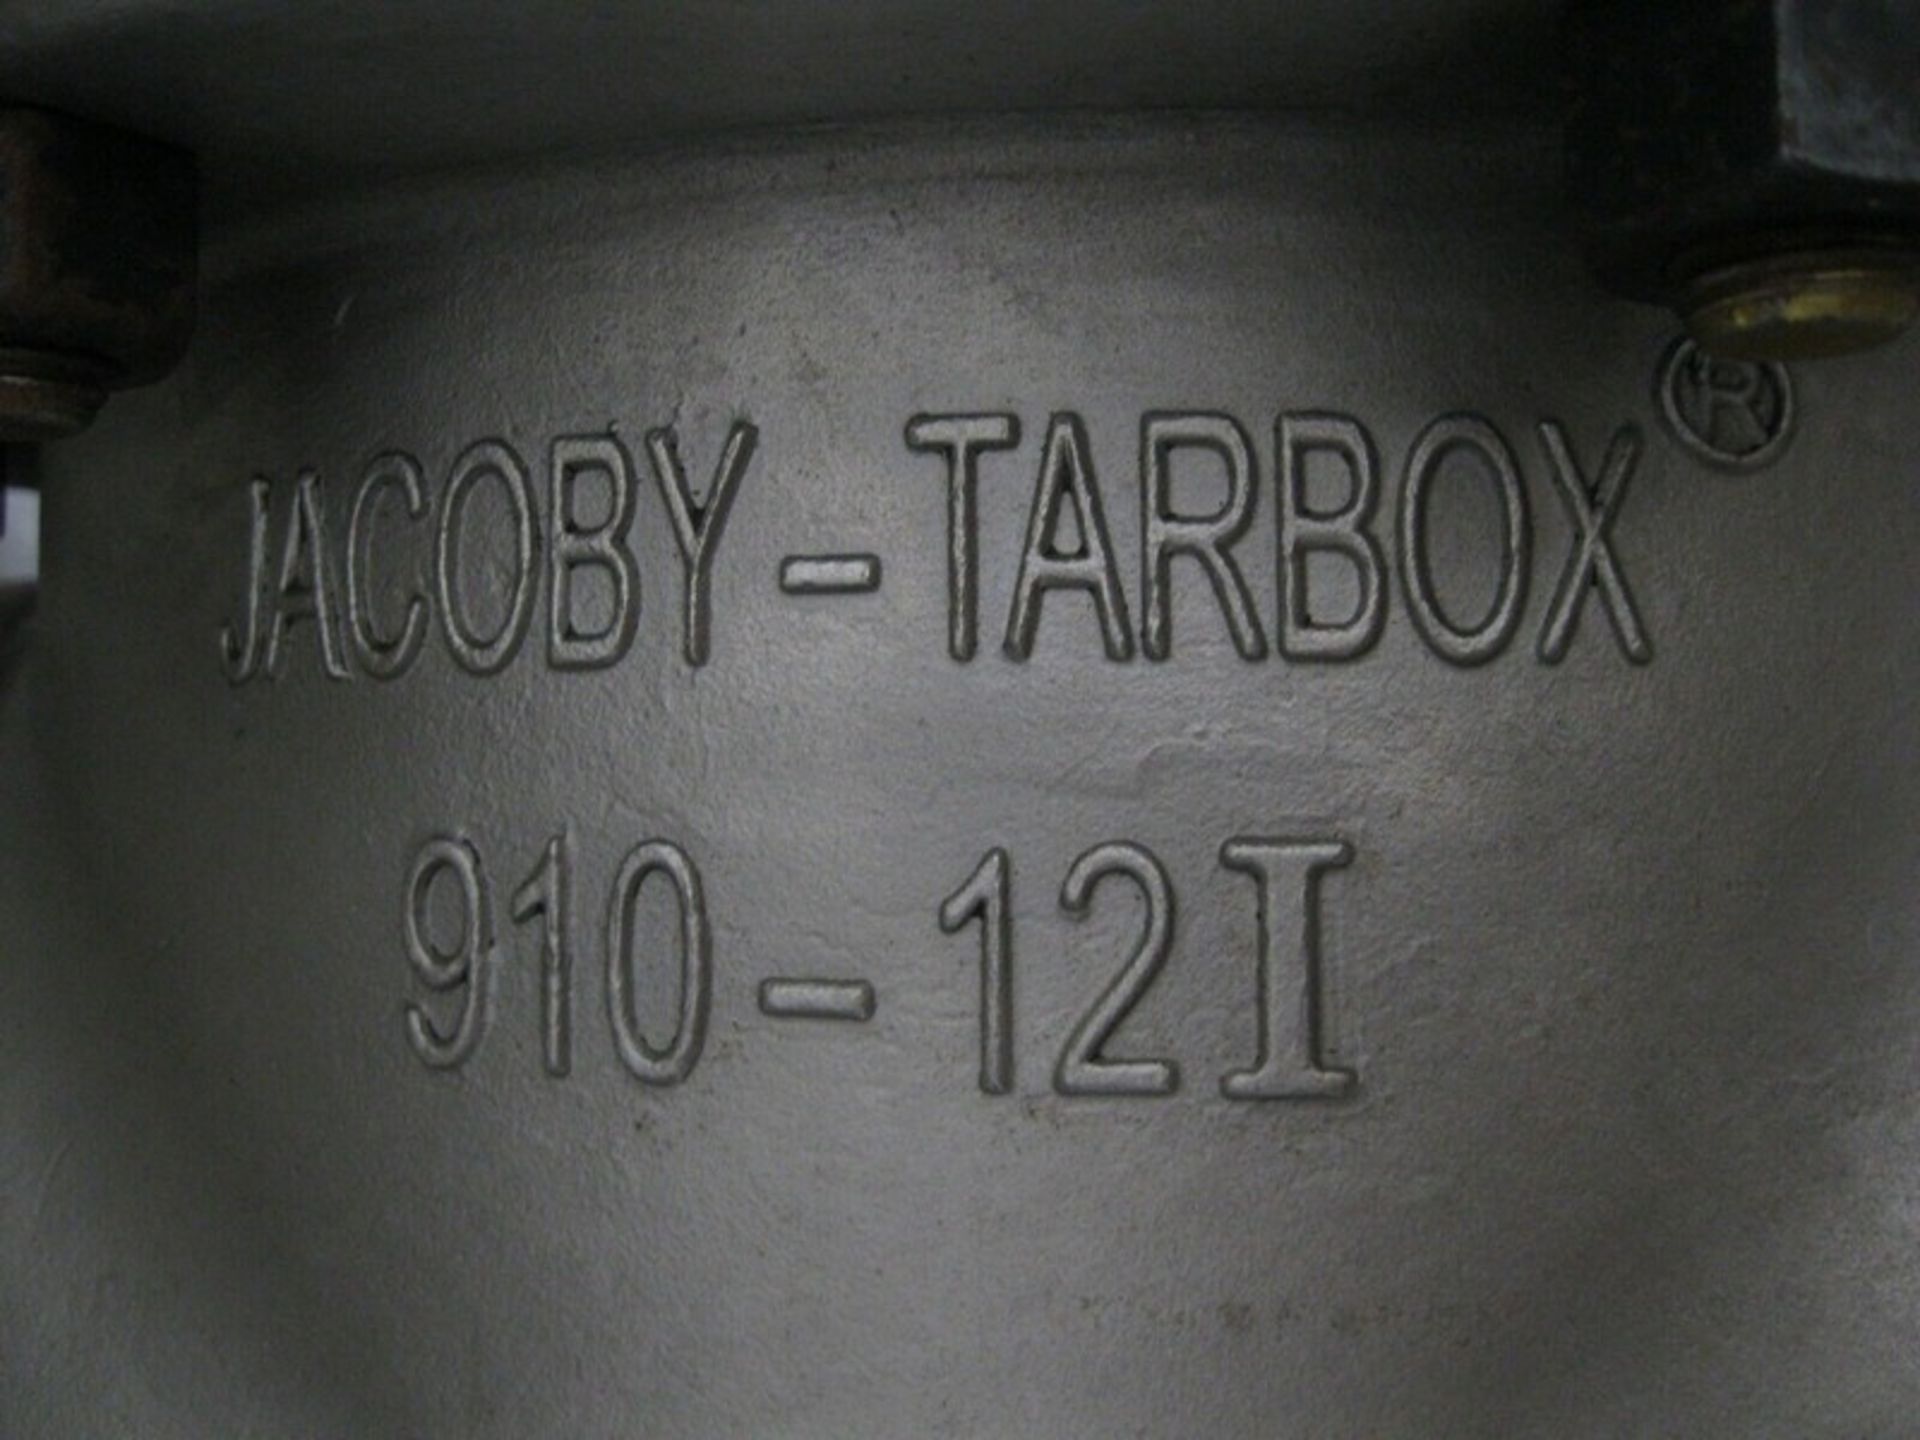 12" 150# Jacoby-Tarbox 910-12I SS Sight Flow Indicator NEW (Loading Fee $50) (Located Springfield, - Image 7 of 8